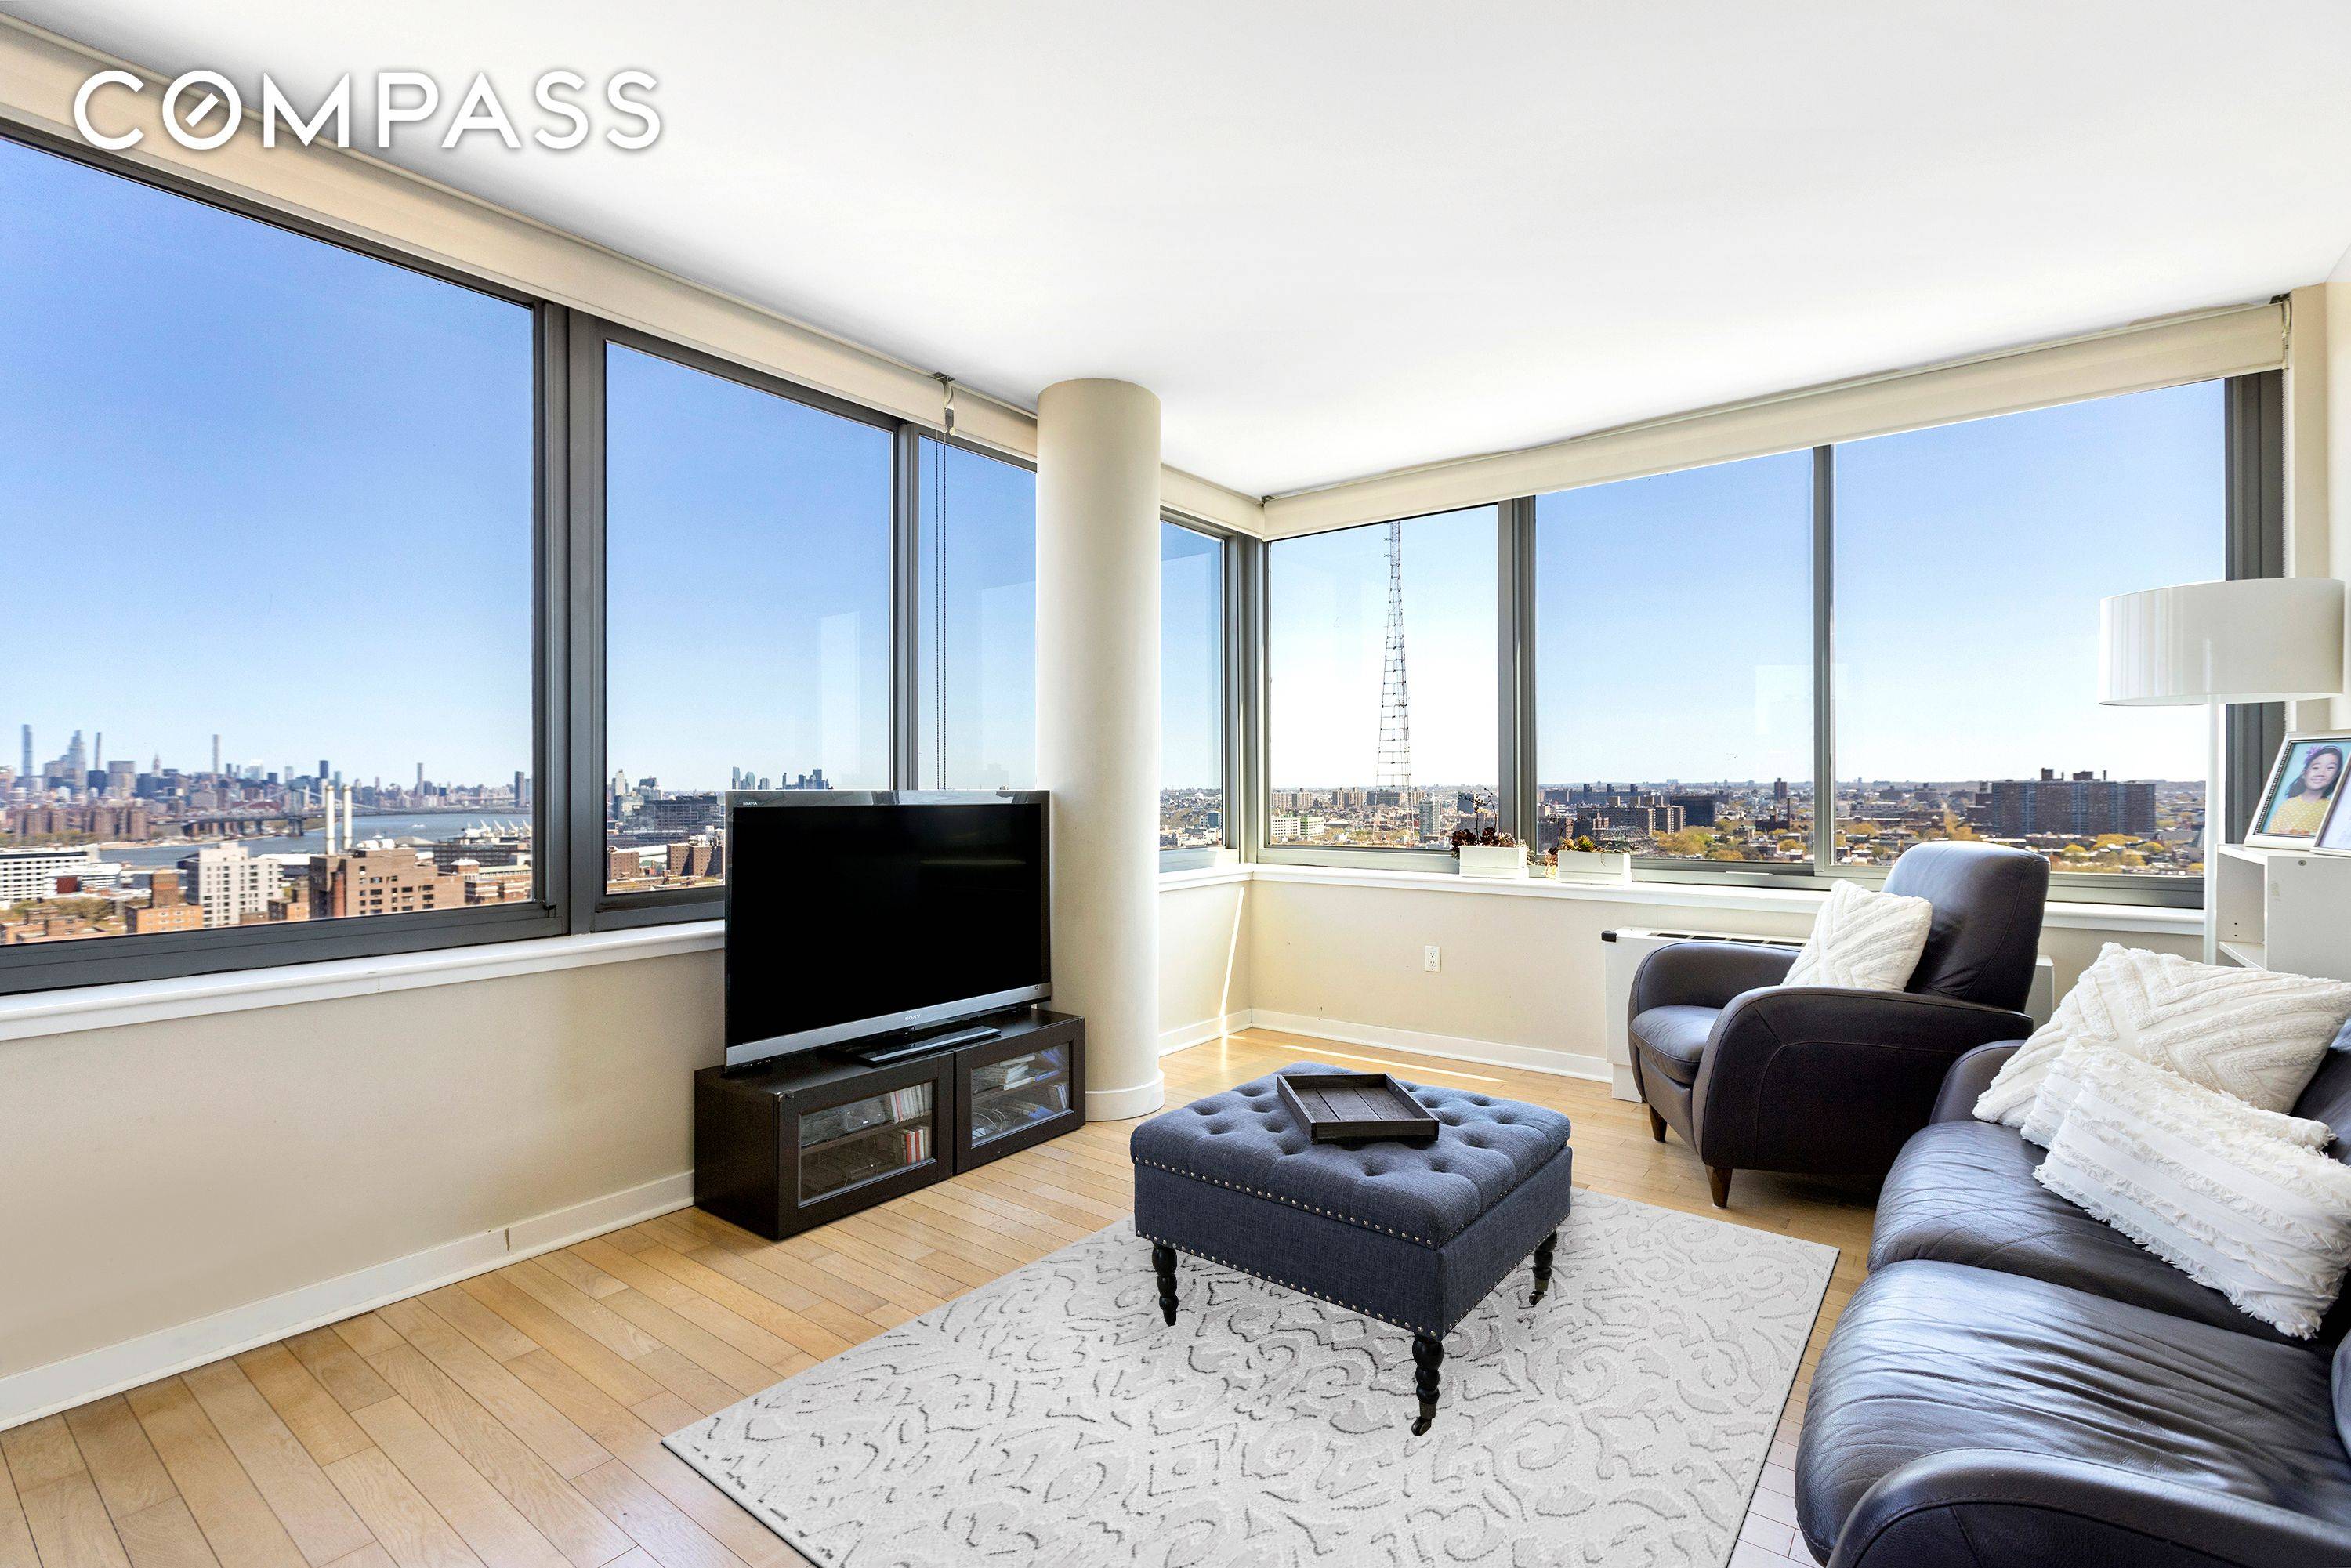 One of the highest floor two bedrooms in the building, with a once in lifetime view.